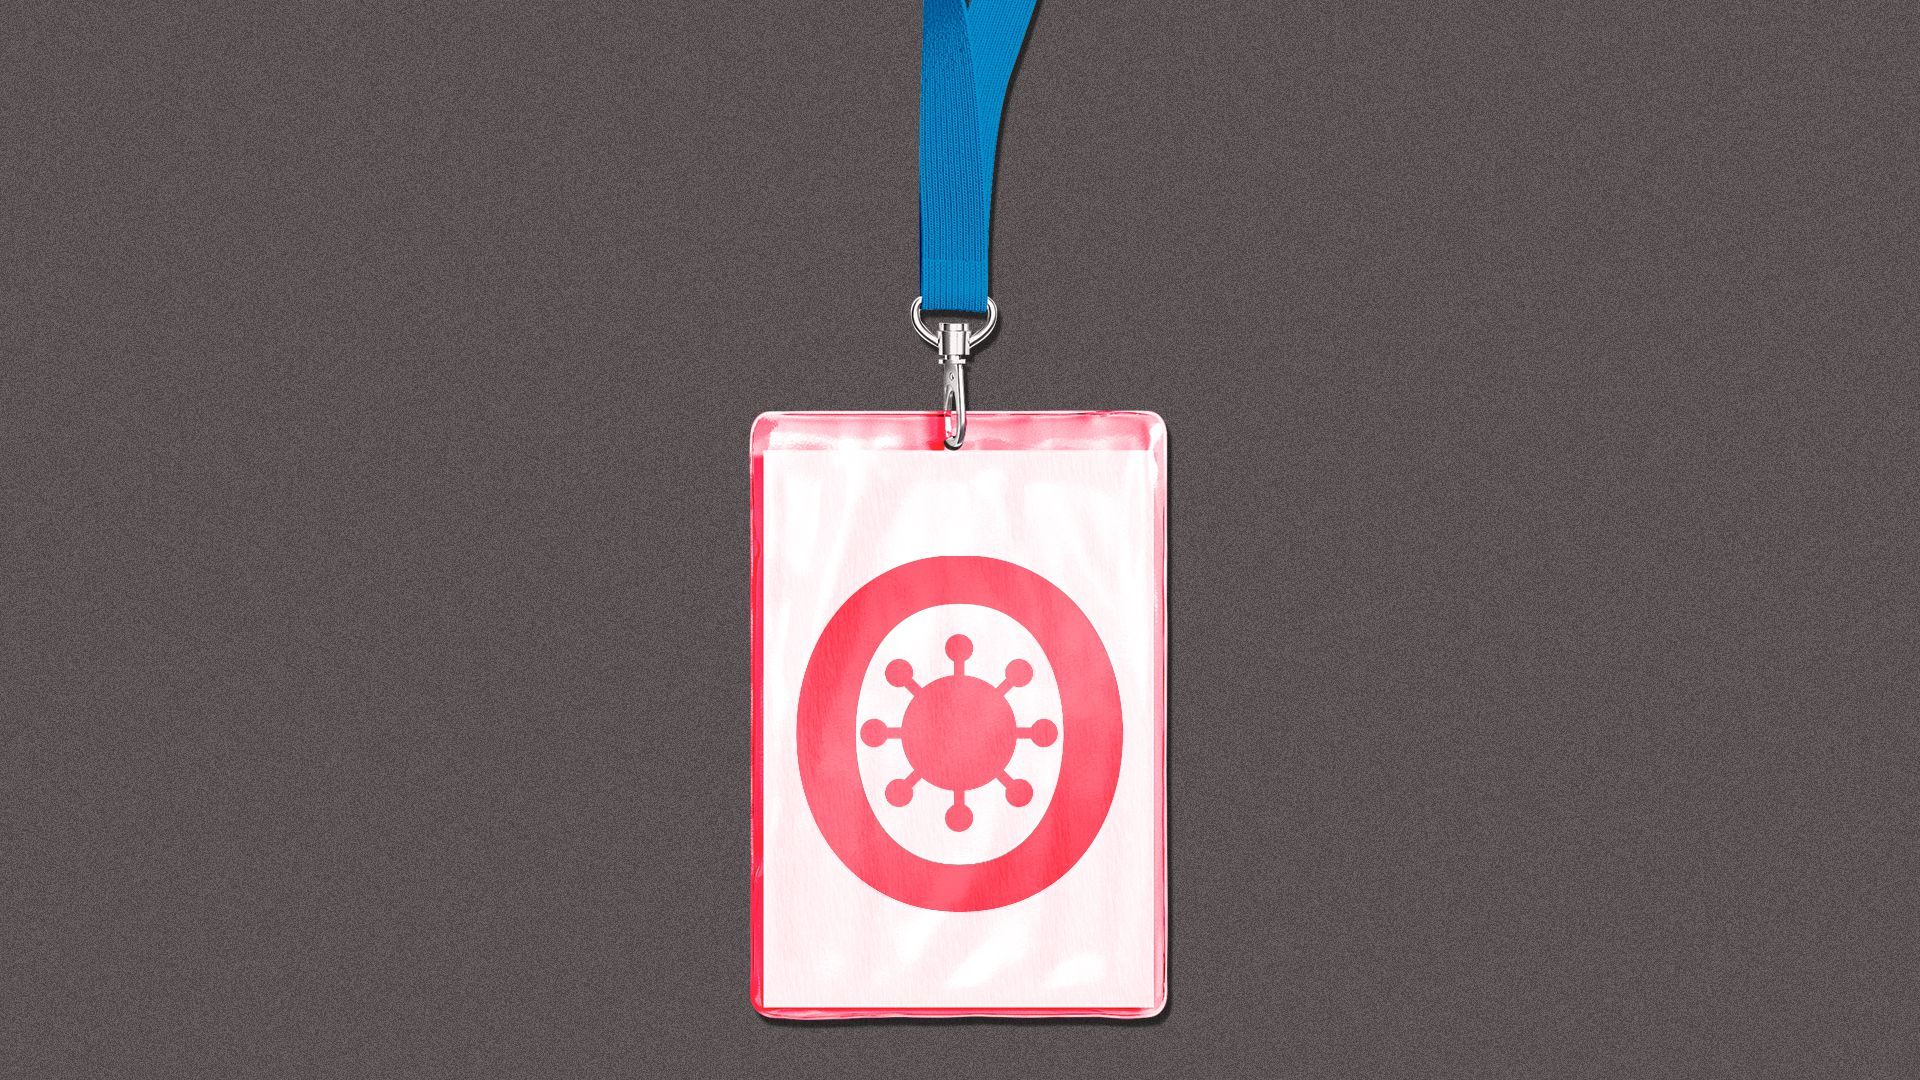 Illustration of a conference lanyard with the letter O and a covid particle icon on it.